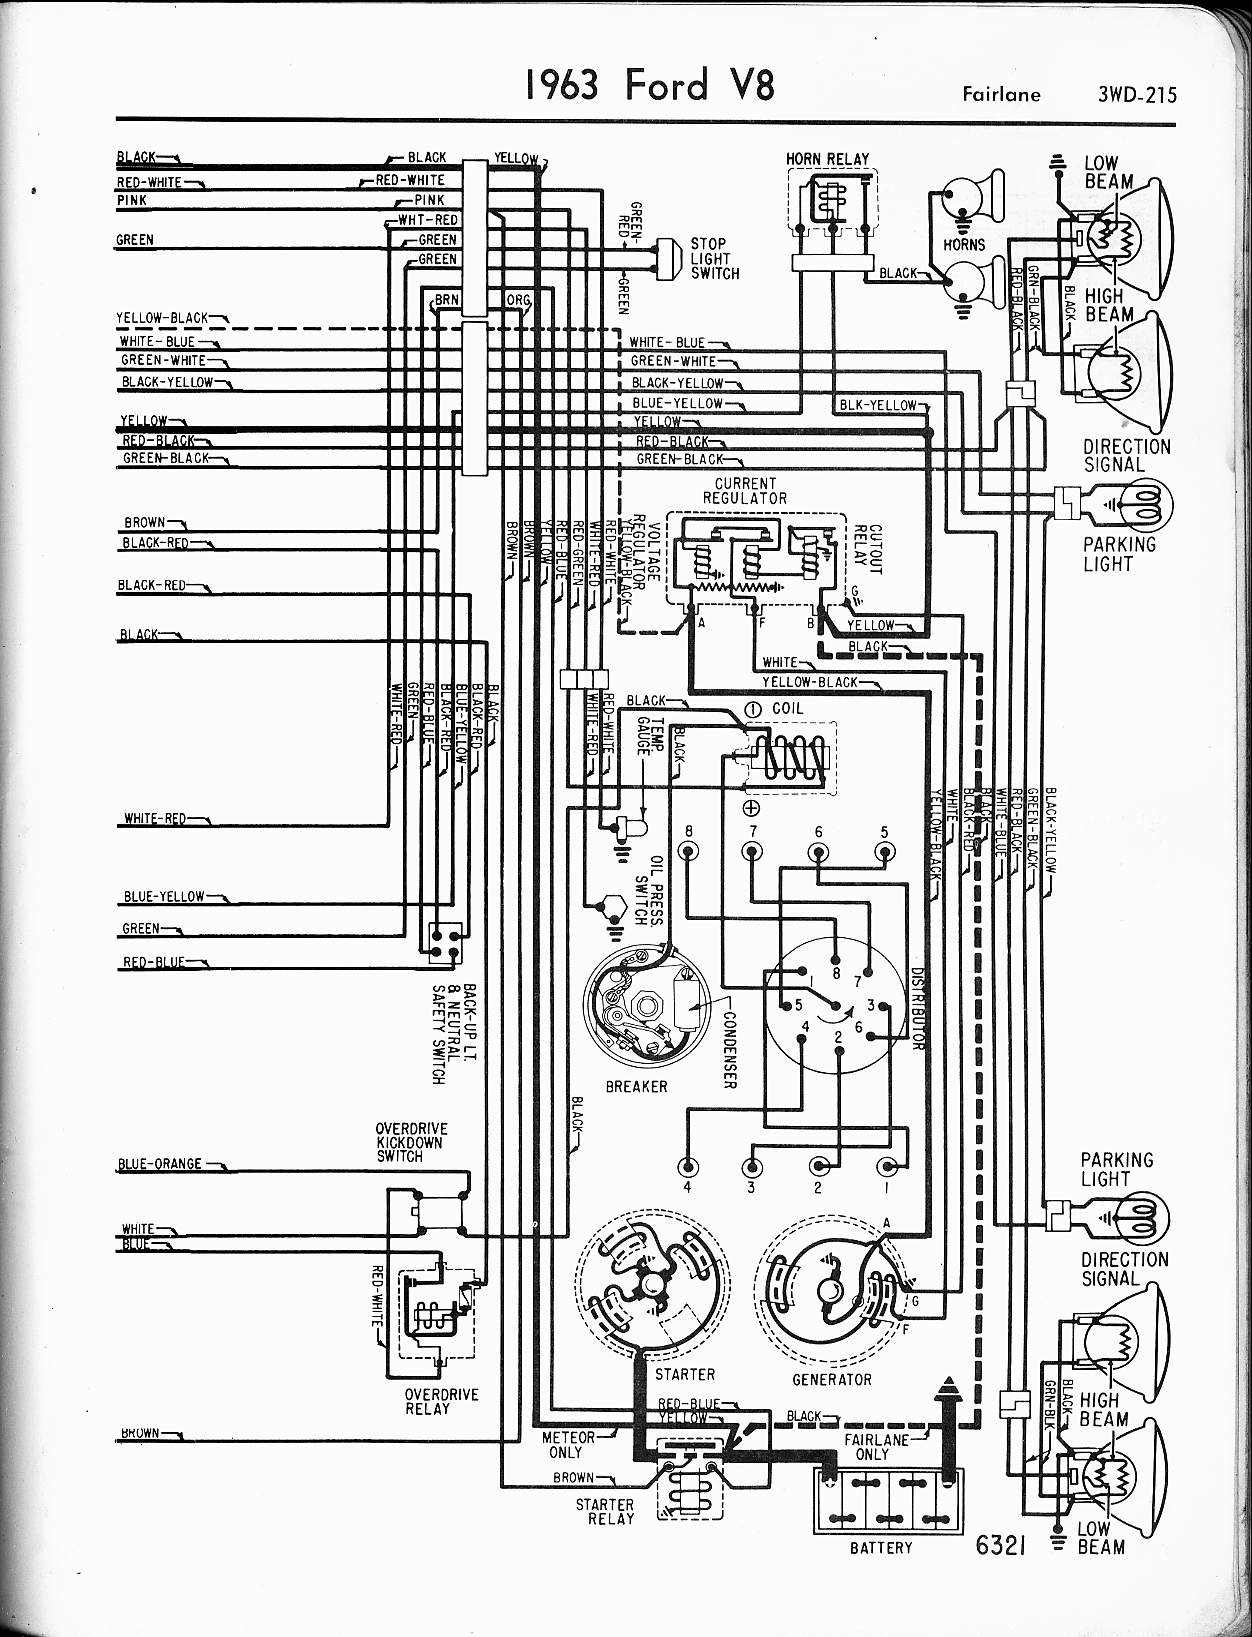 old car manual project wiring diagrams